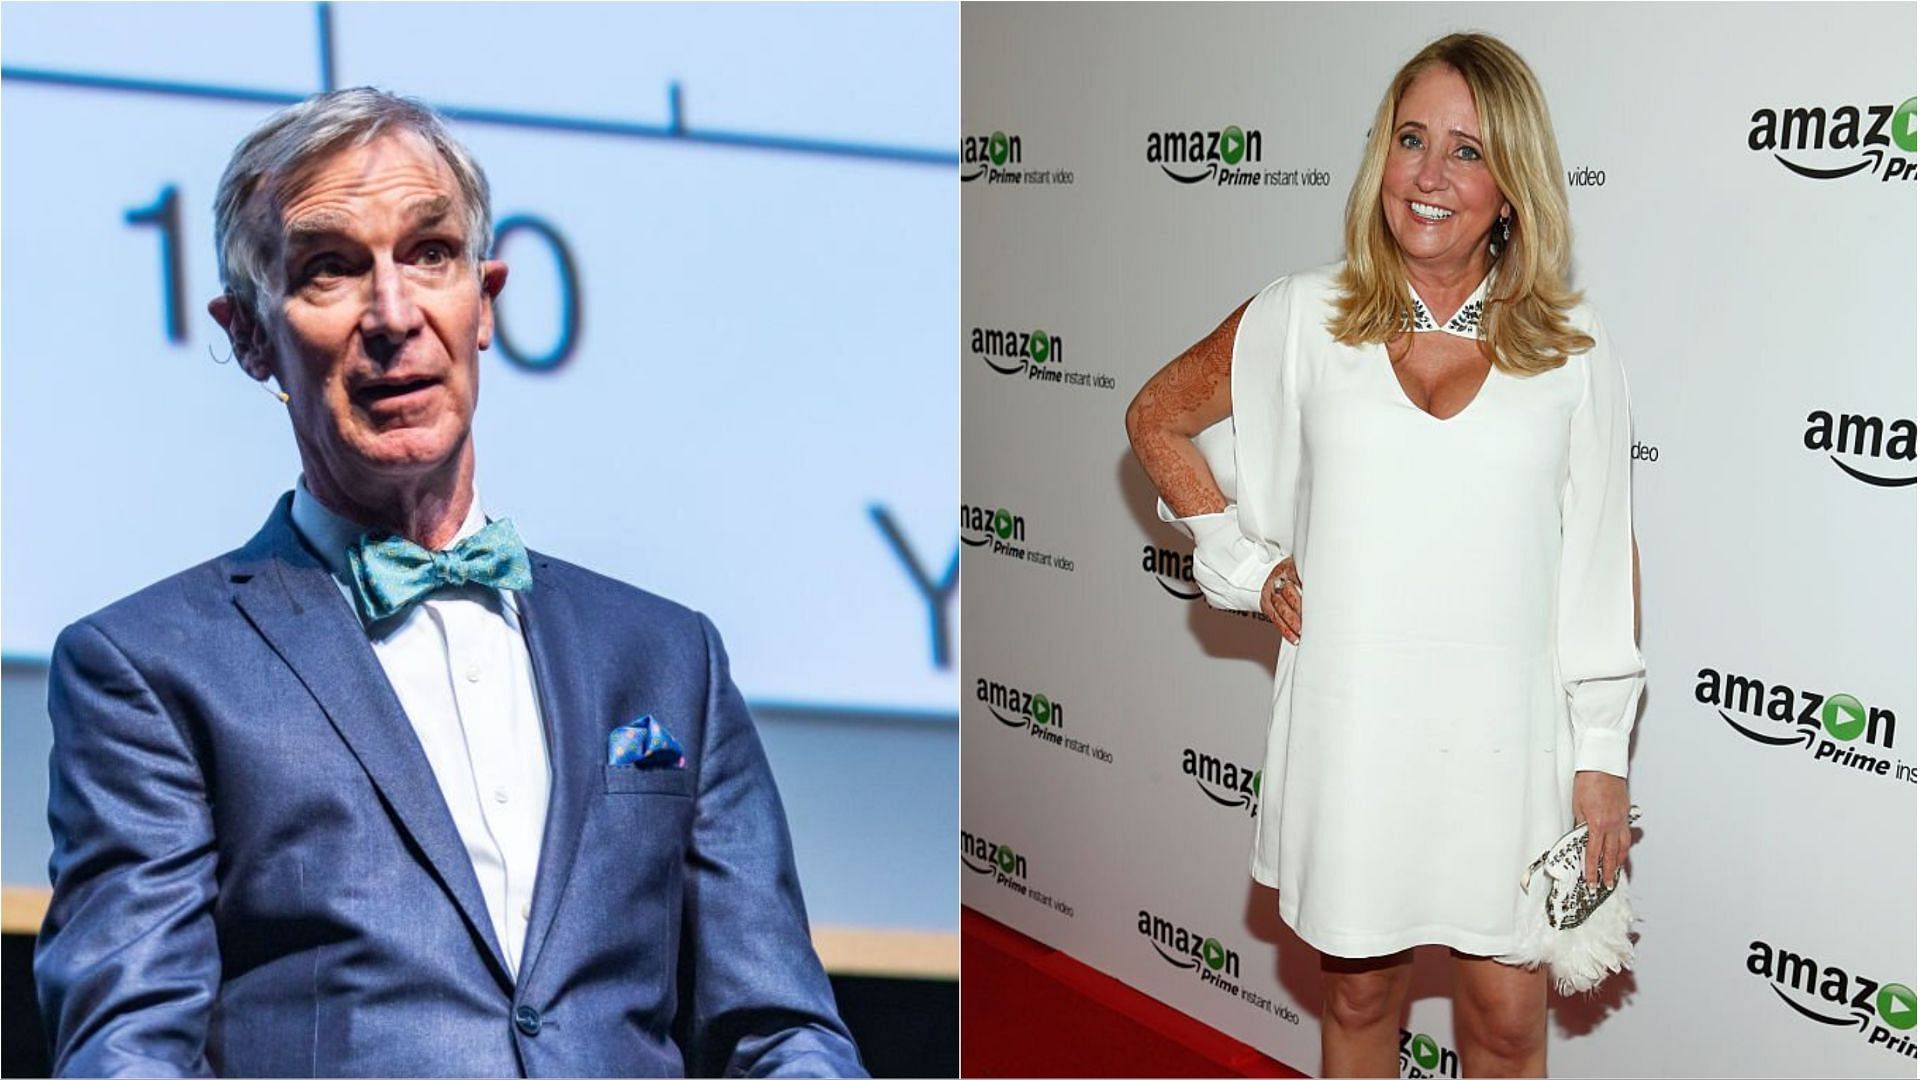 Bill Nye issued a restraining order against VBlair Tindall (Images via Brian Ach and Mathew Tsang/Getty Images)